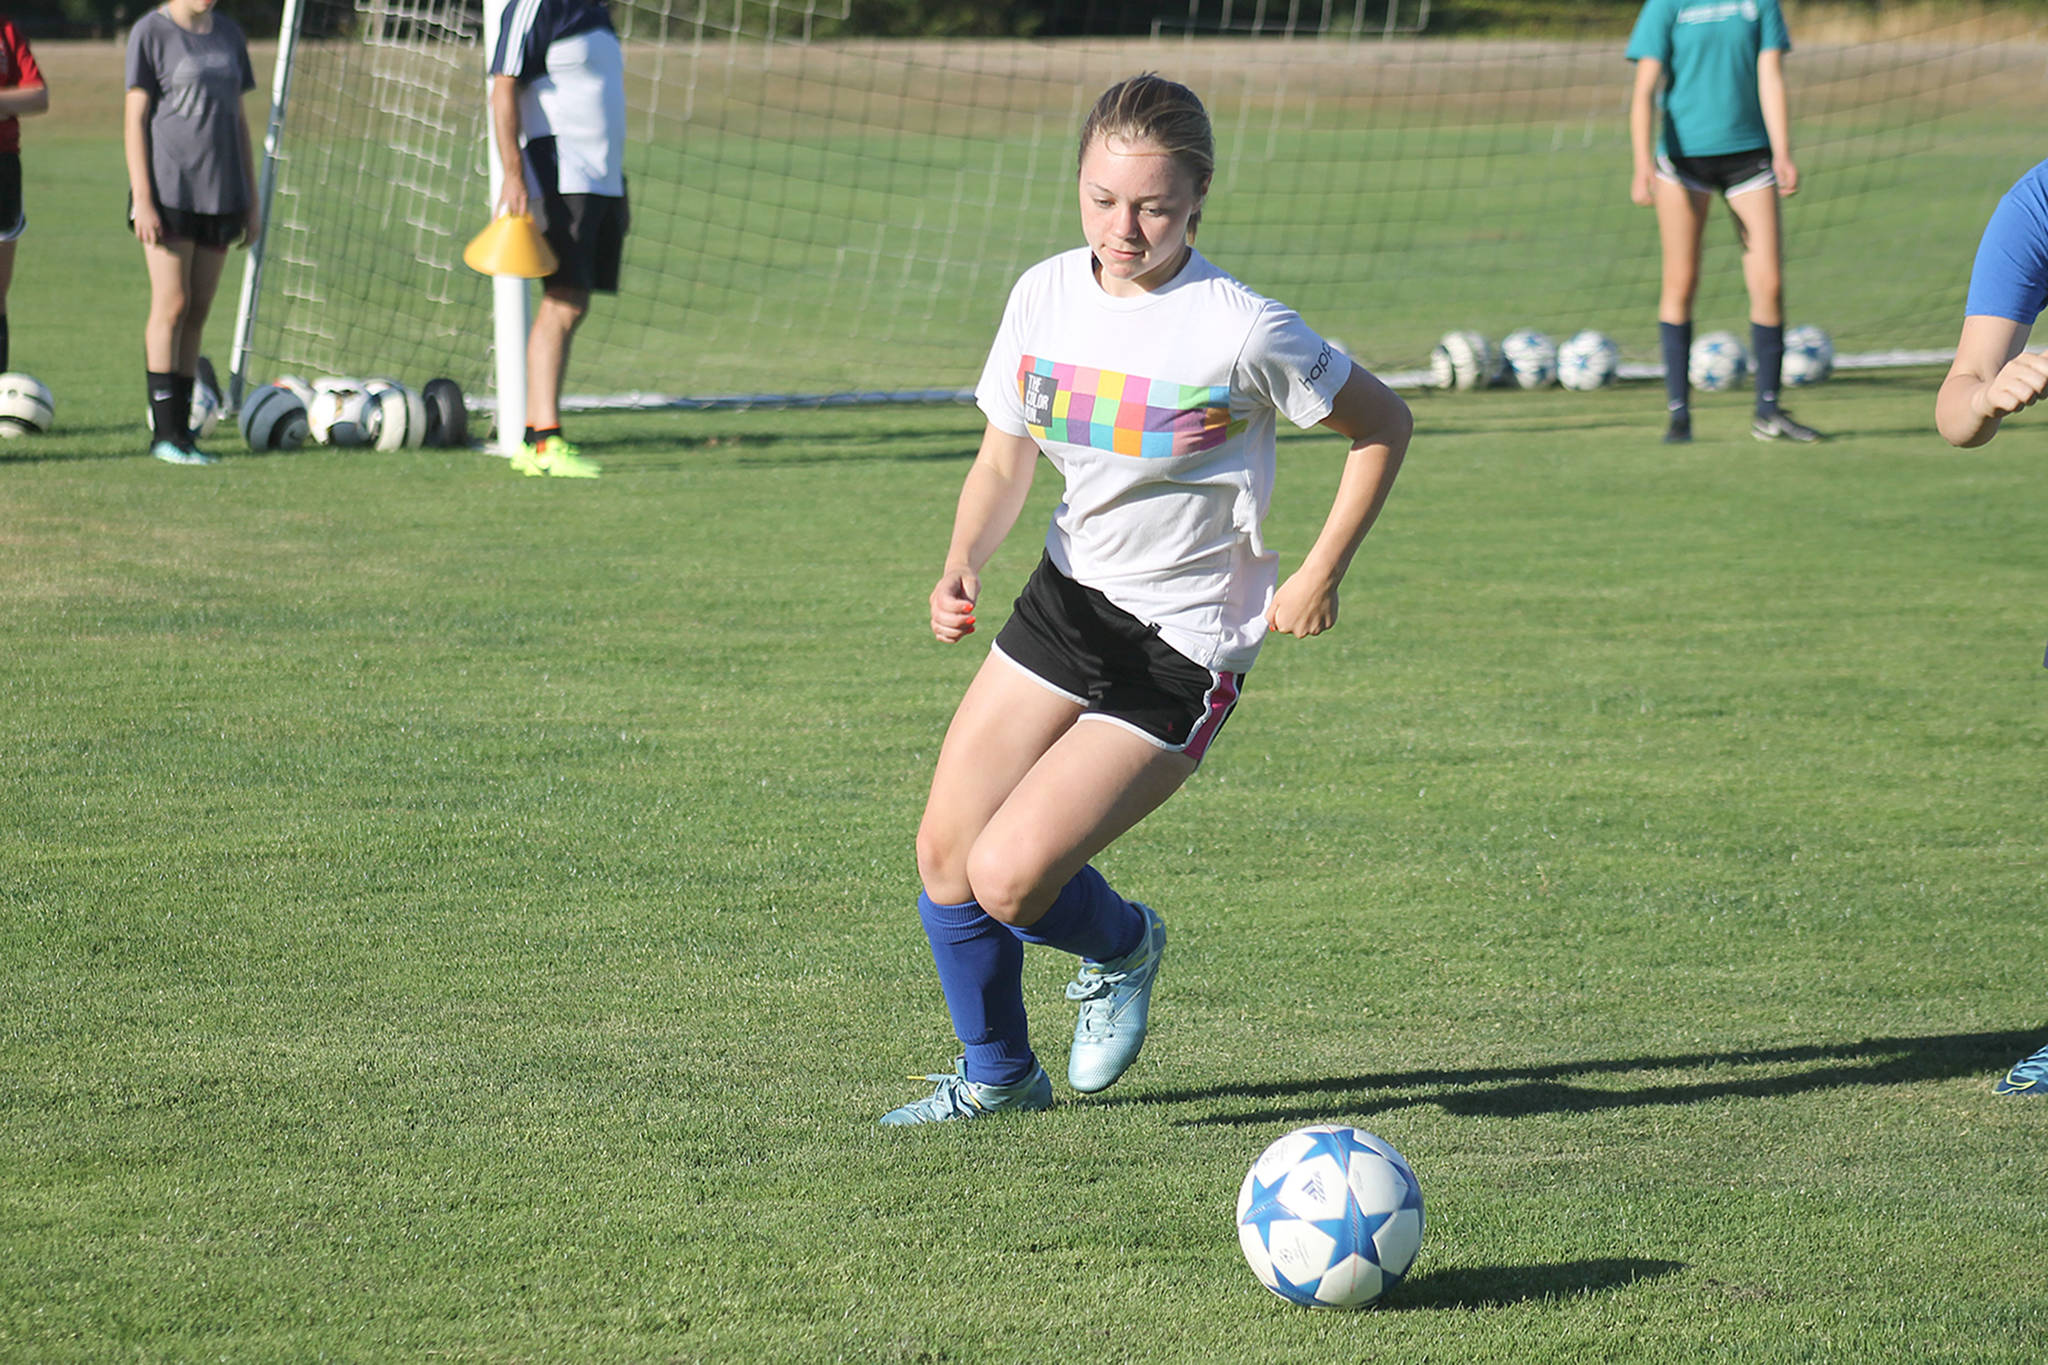 New goals set a high bar for Falcon girls soccer squad | FALL SPORTS PREVIEW